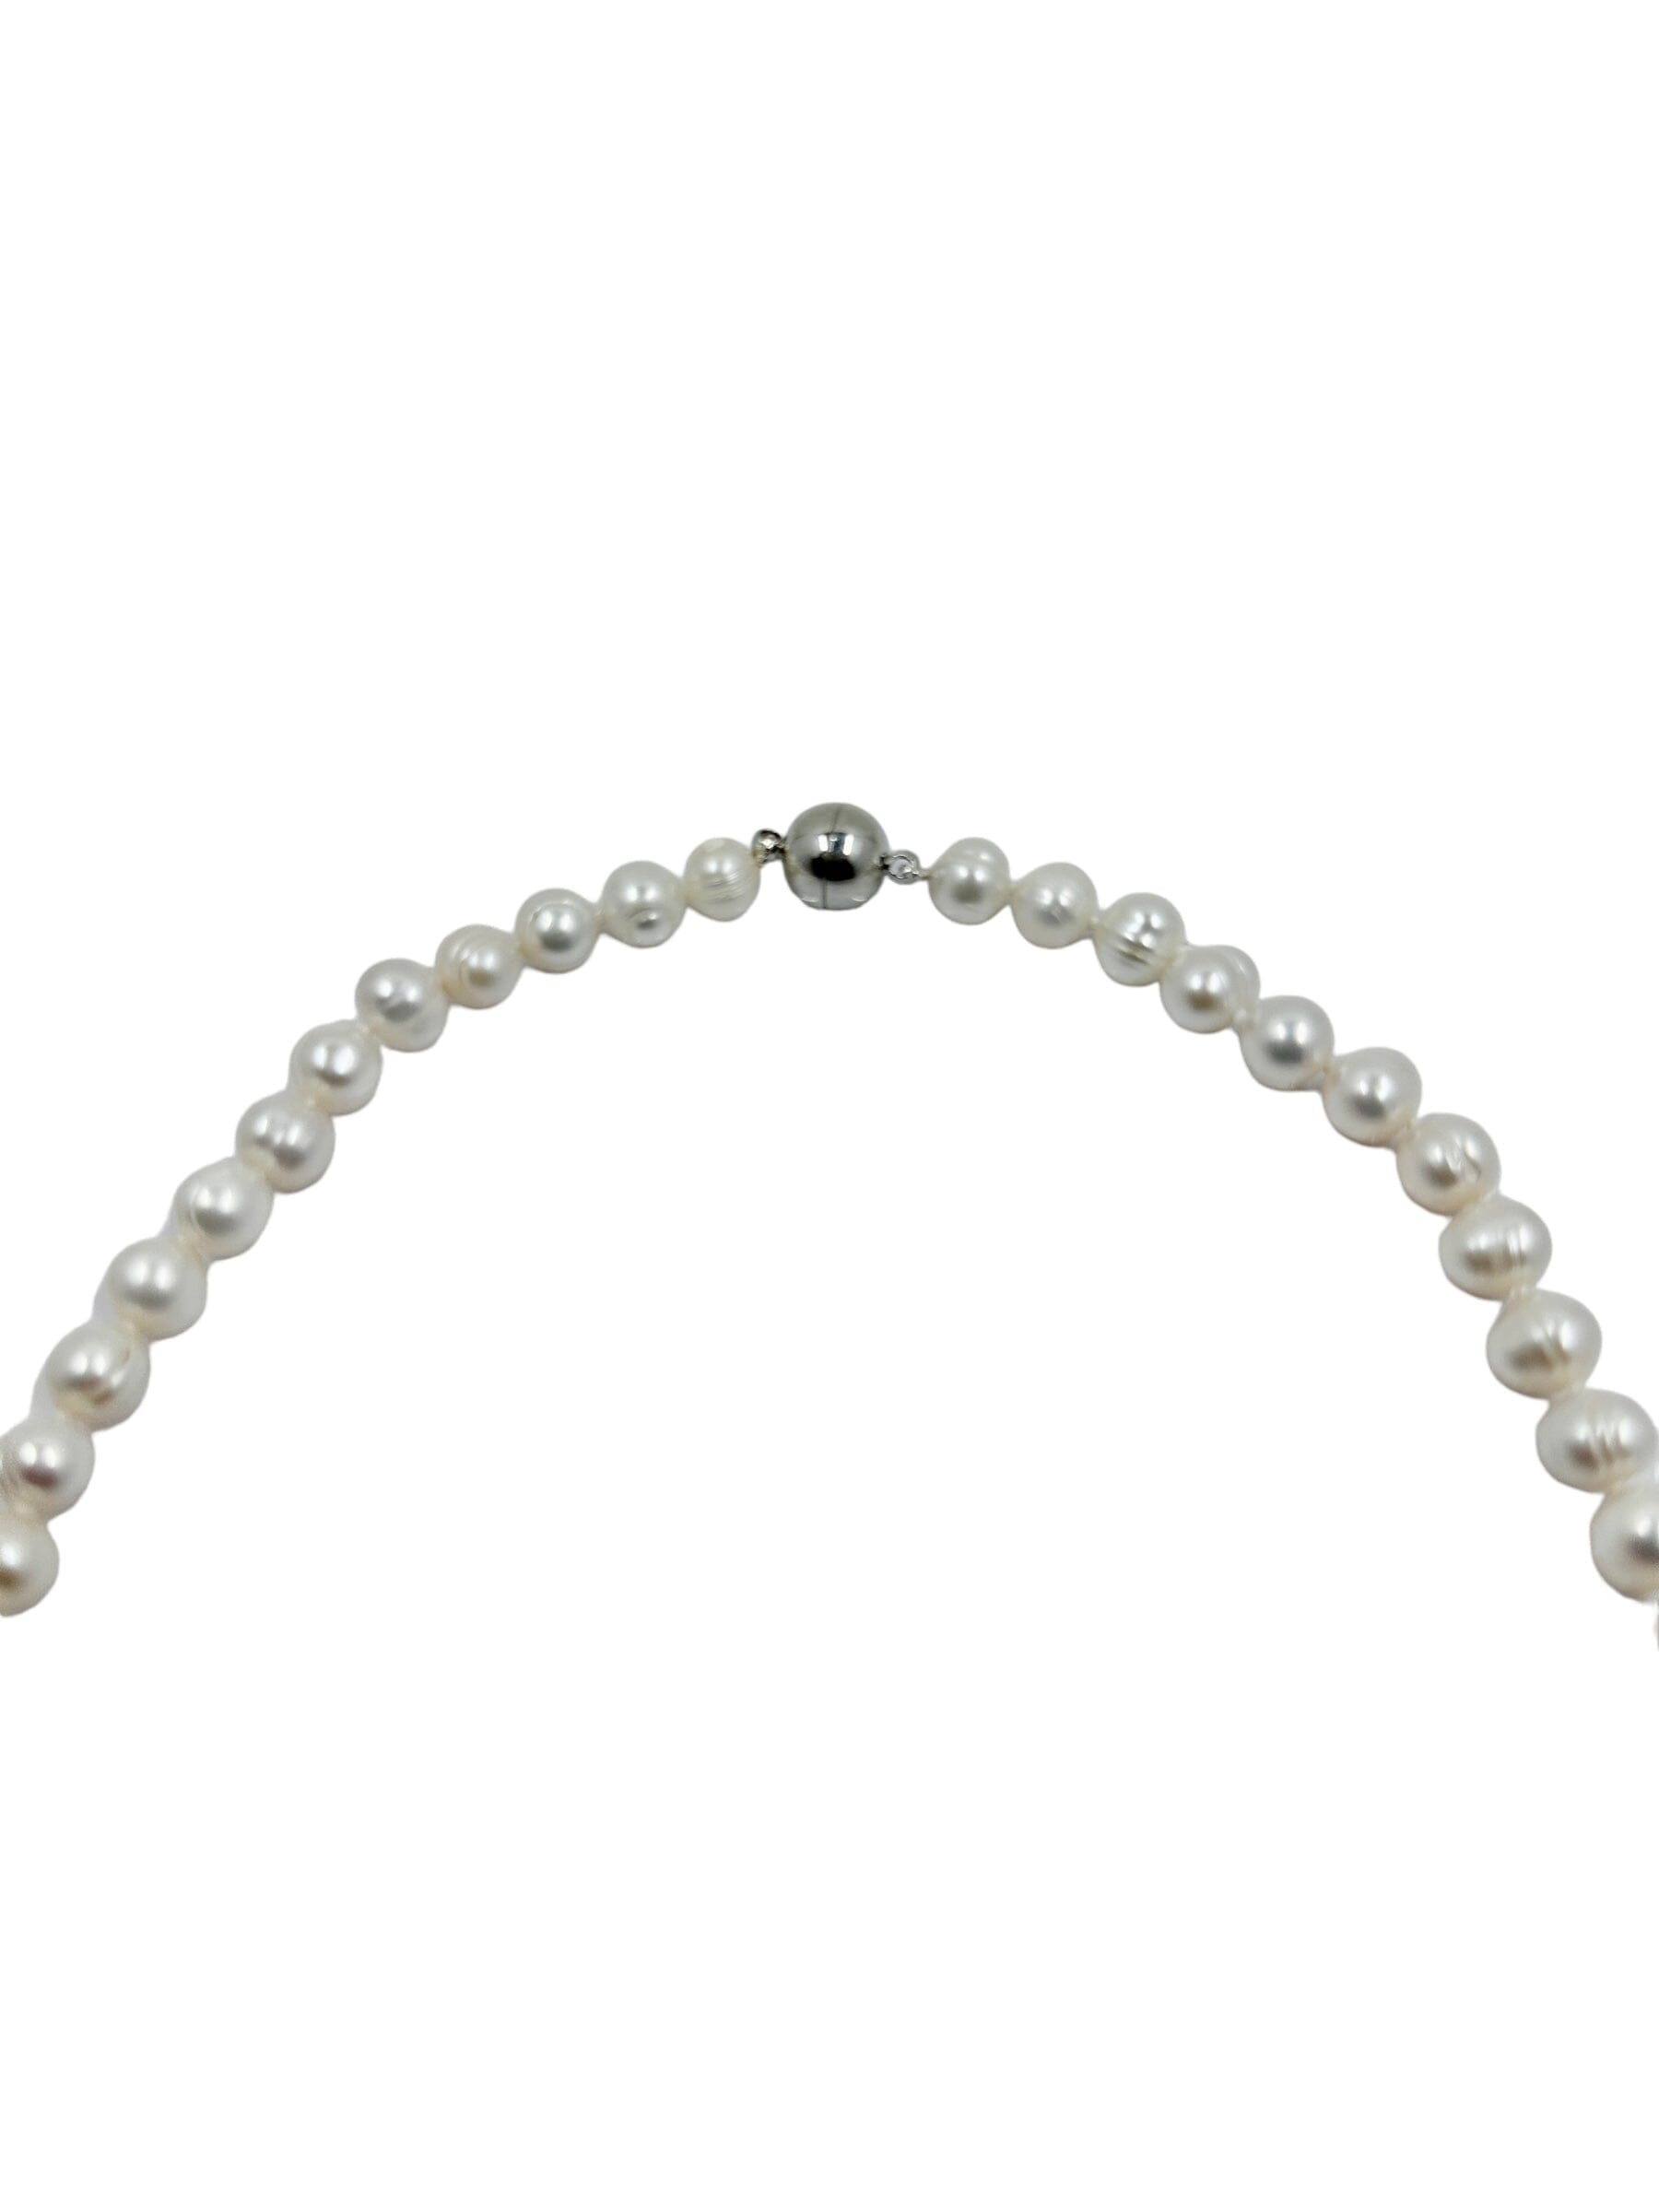 8mm Cultured Freshwater Pearl 22 inch Necklace Necklaces Trendzio Jewelry 